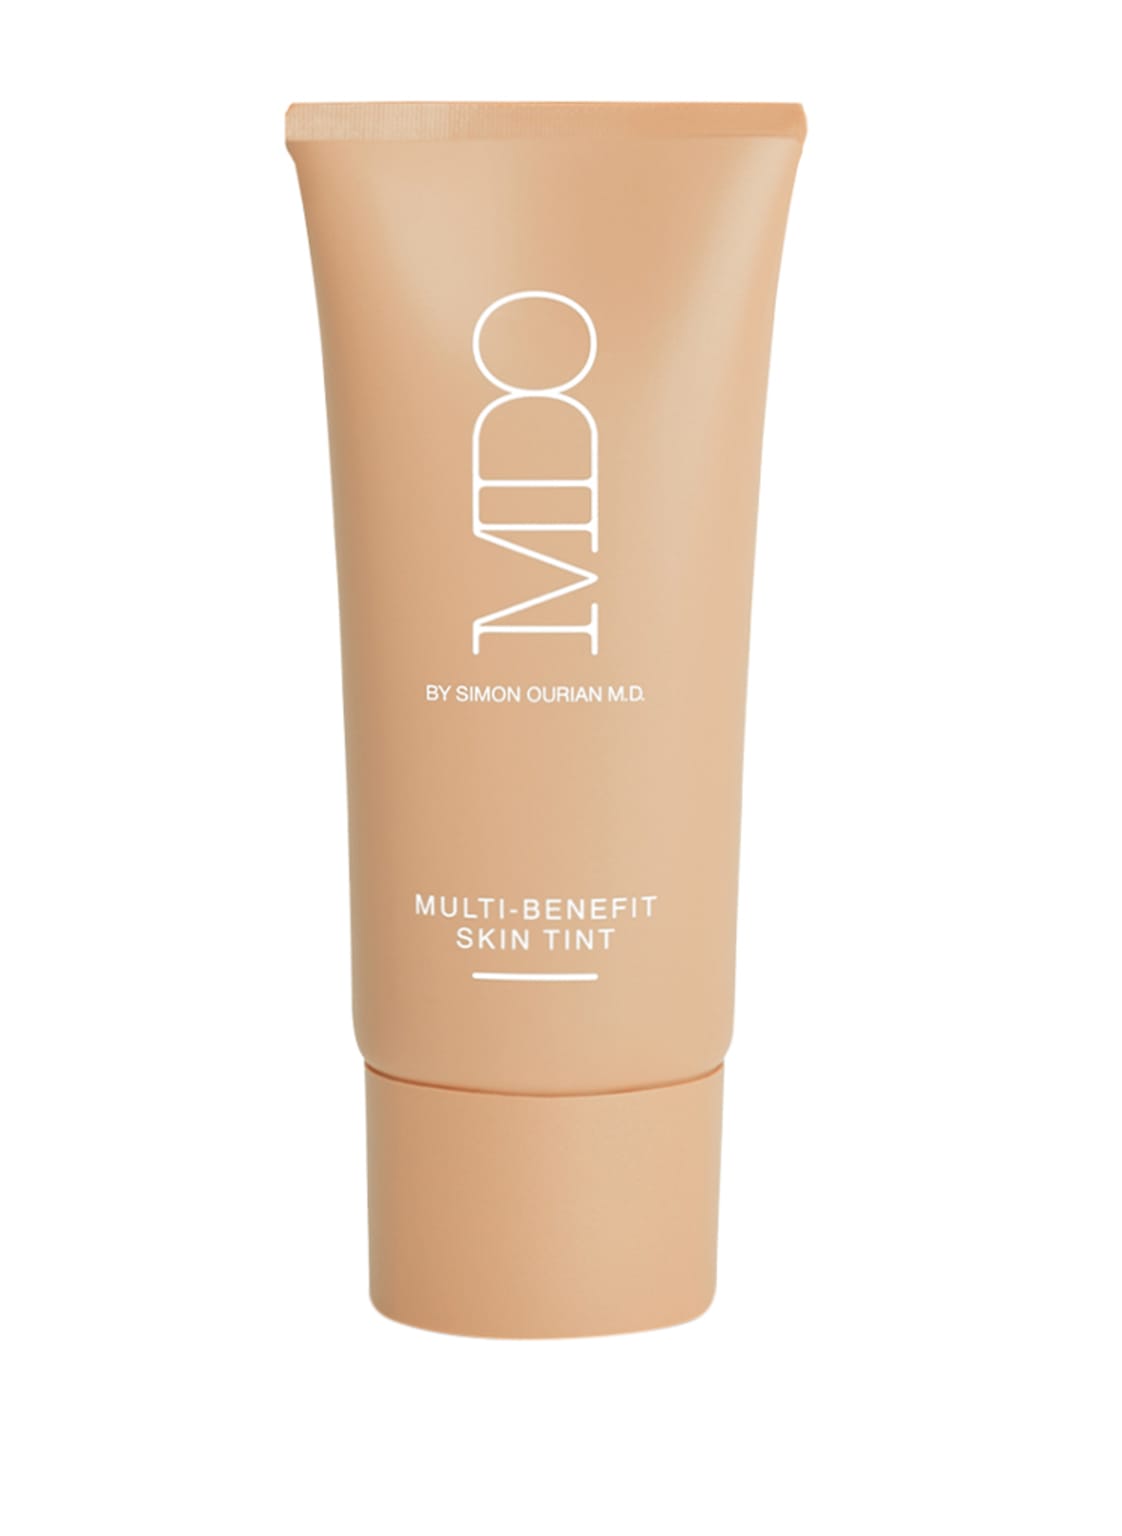 Image of Mdo By Simon Ourian M.D. Multi-Benefit Skin Tint Foundation